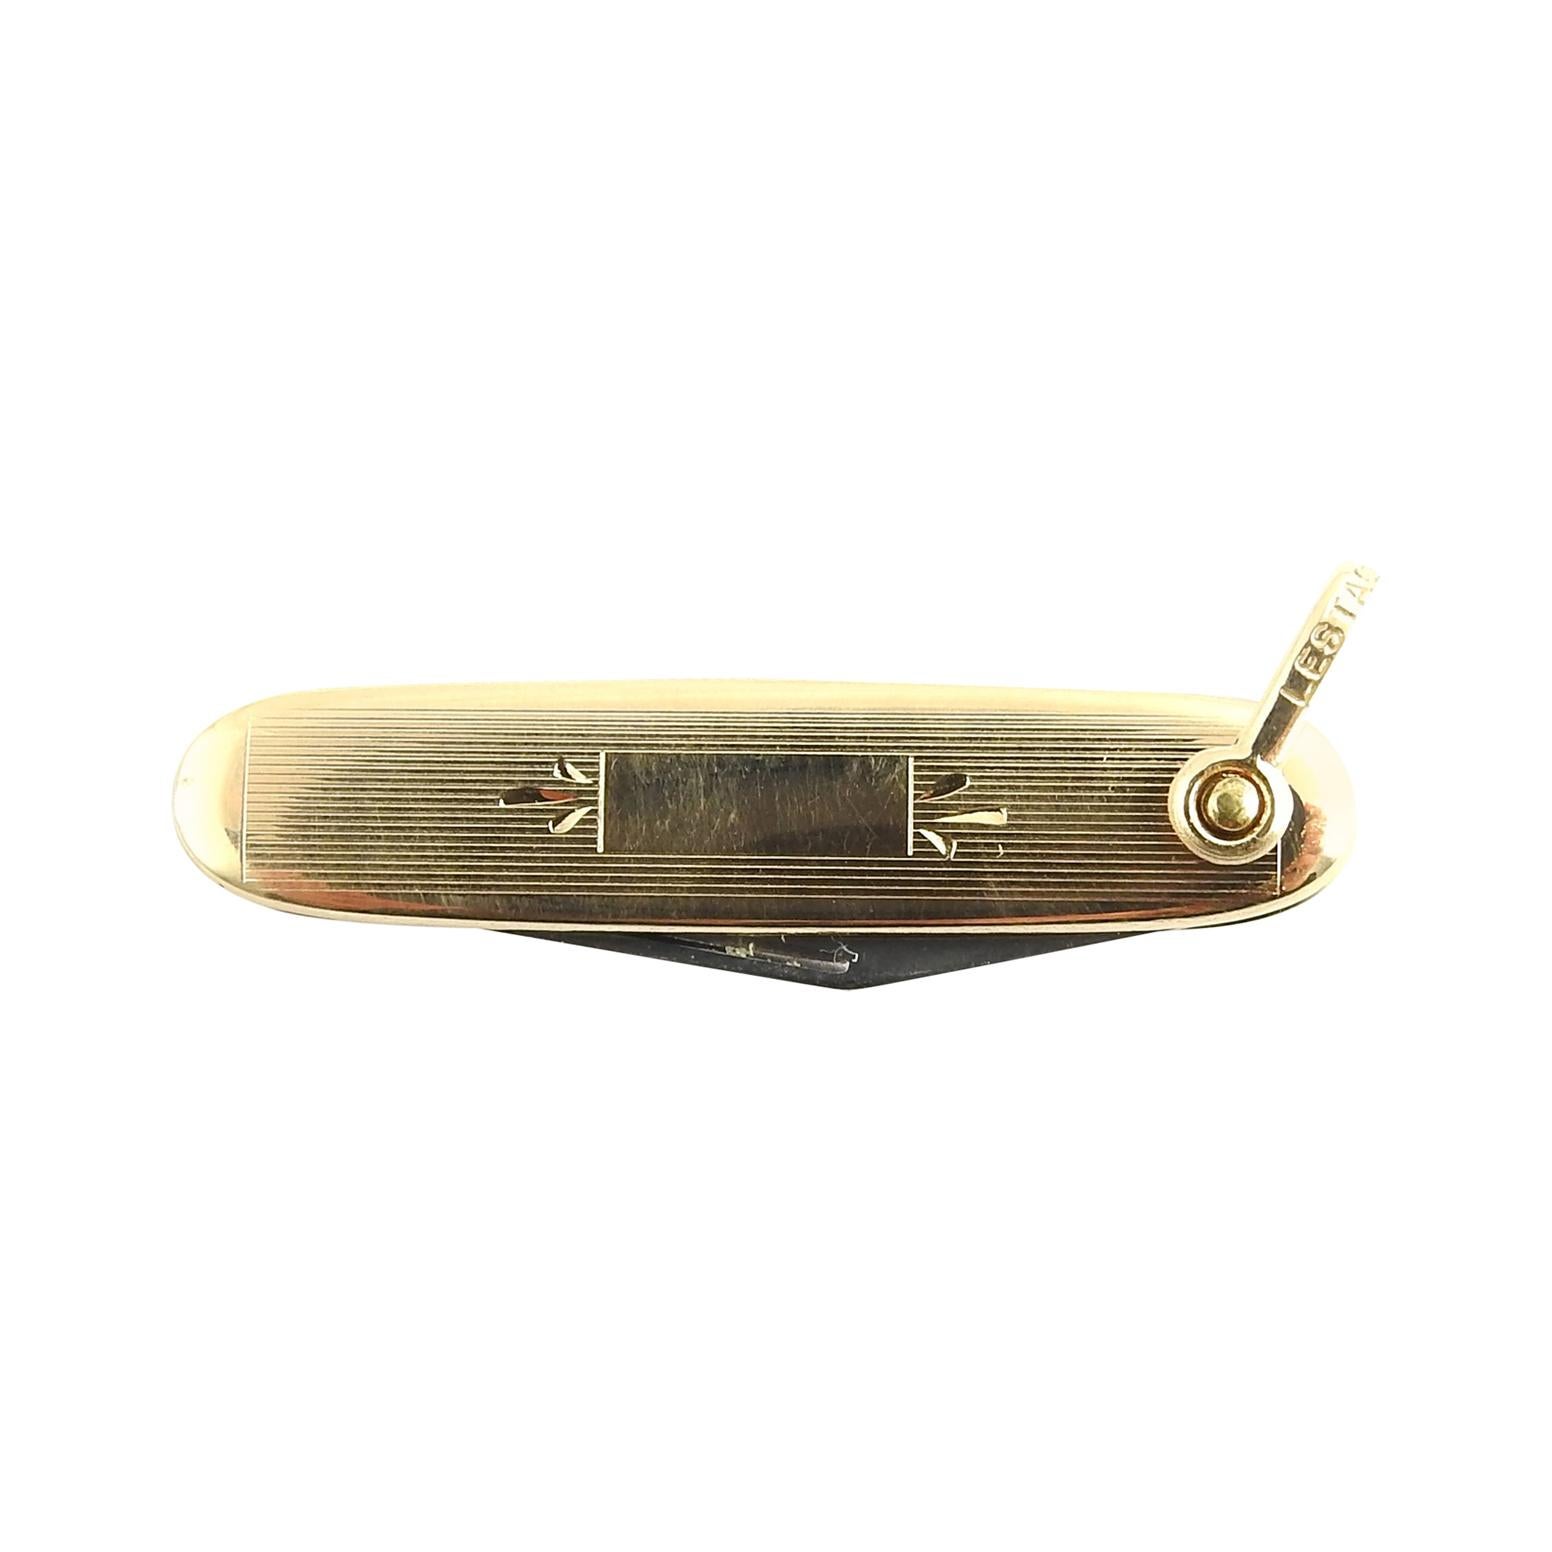 14 Karat Yellow Gold and Stainless Steel Pocket Knife